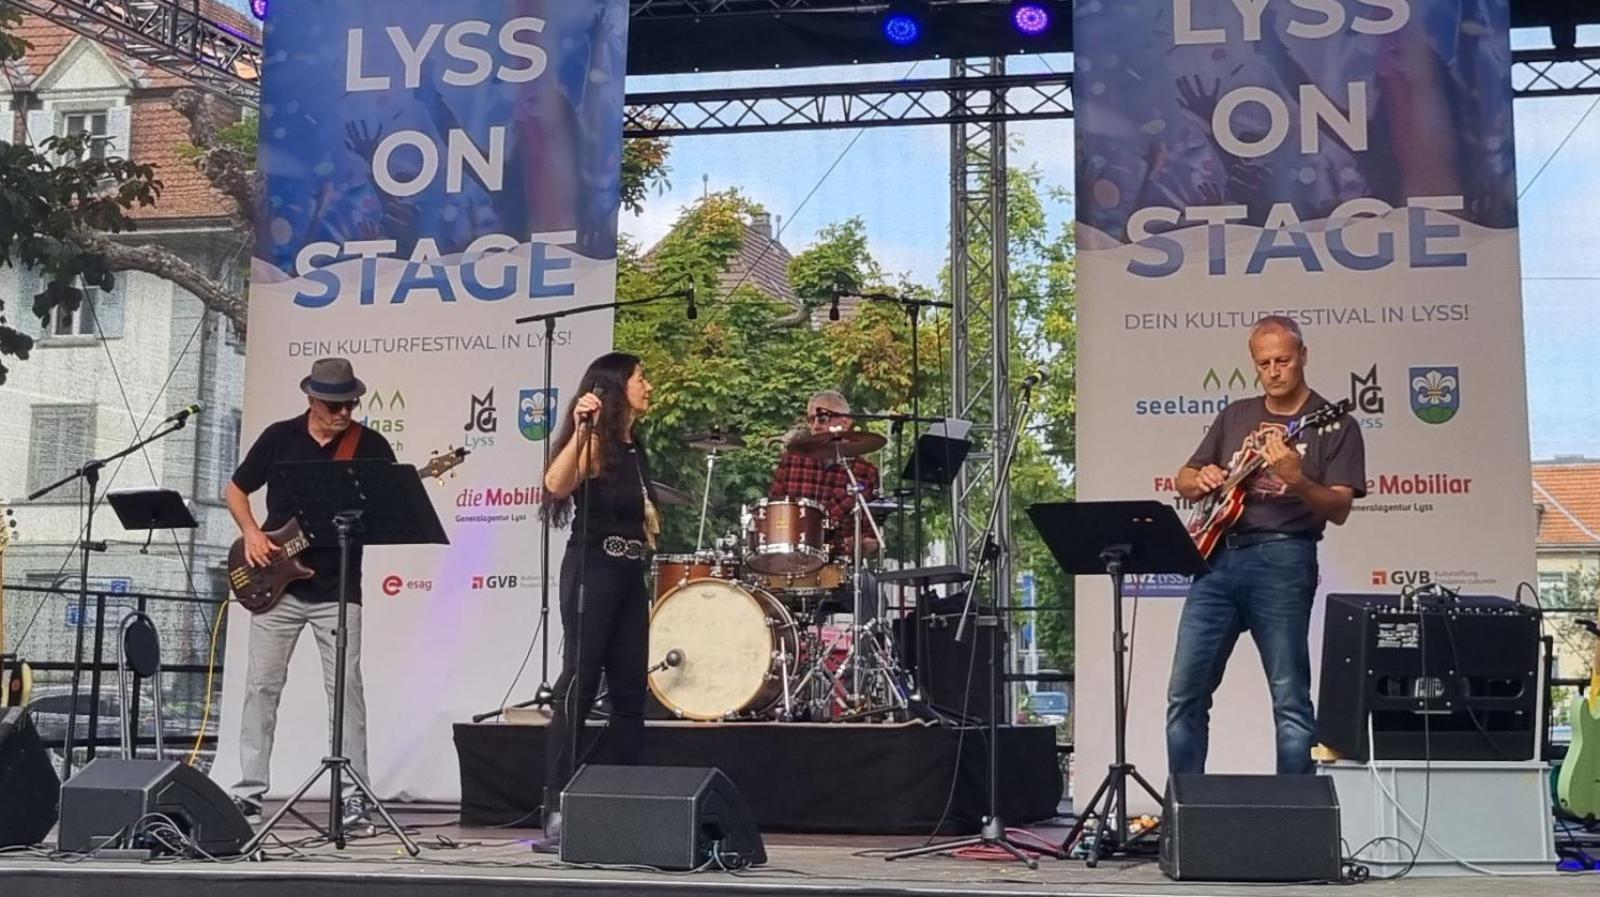 Lyss on Stage, 6. August 2022